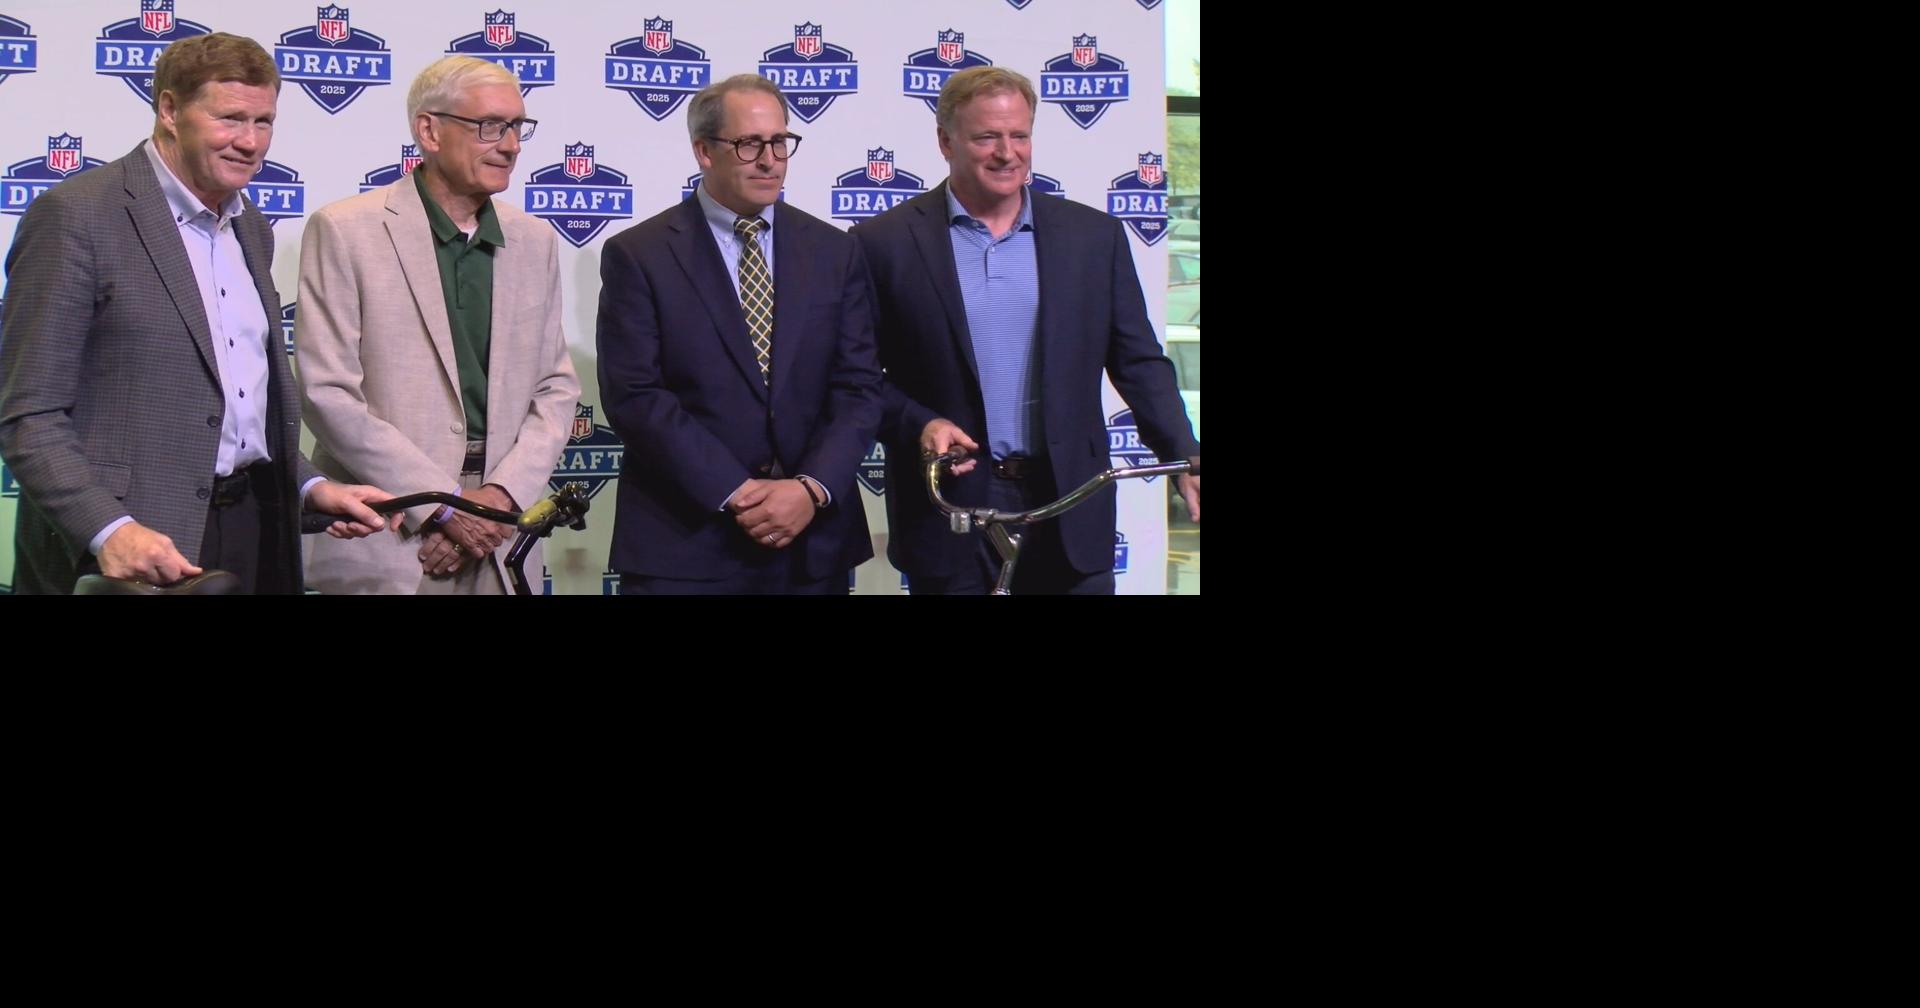 NFL Commissioner Roger Goodell to make appearance at Packers Training Camp,  speak on 2025 Draft